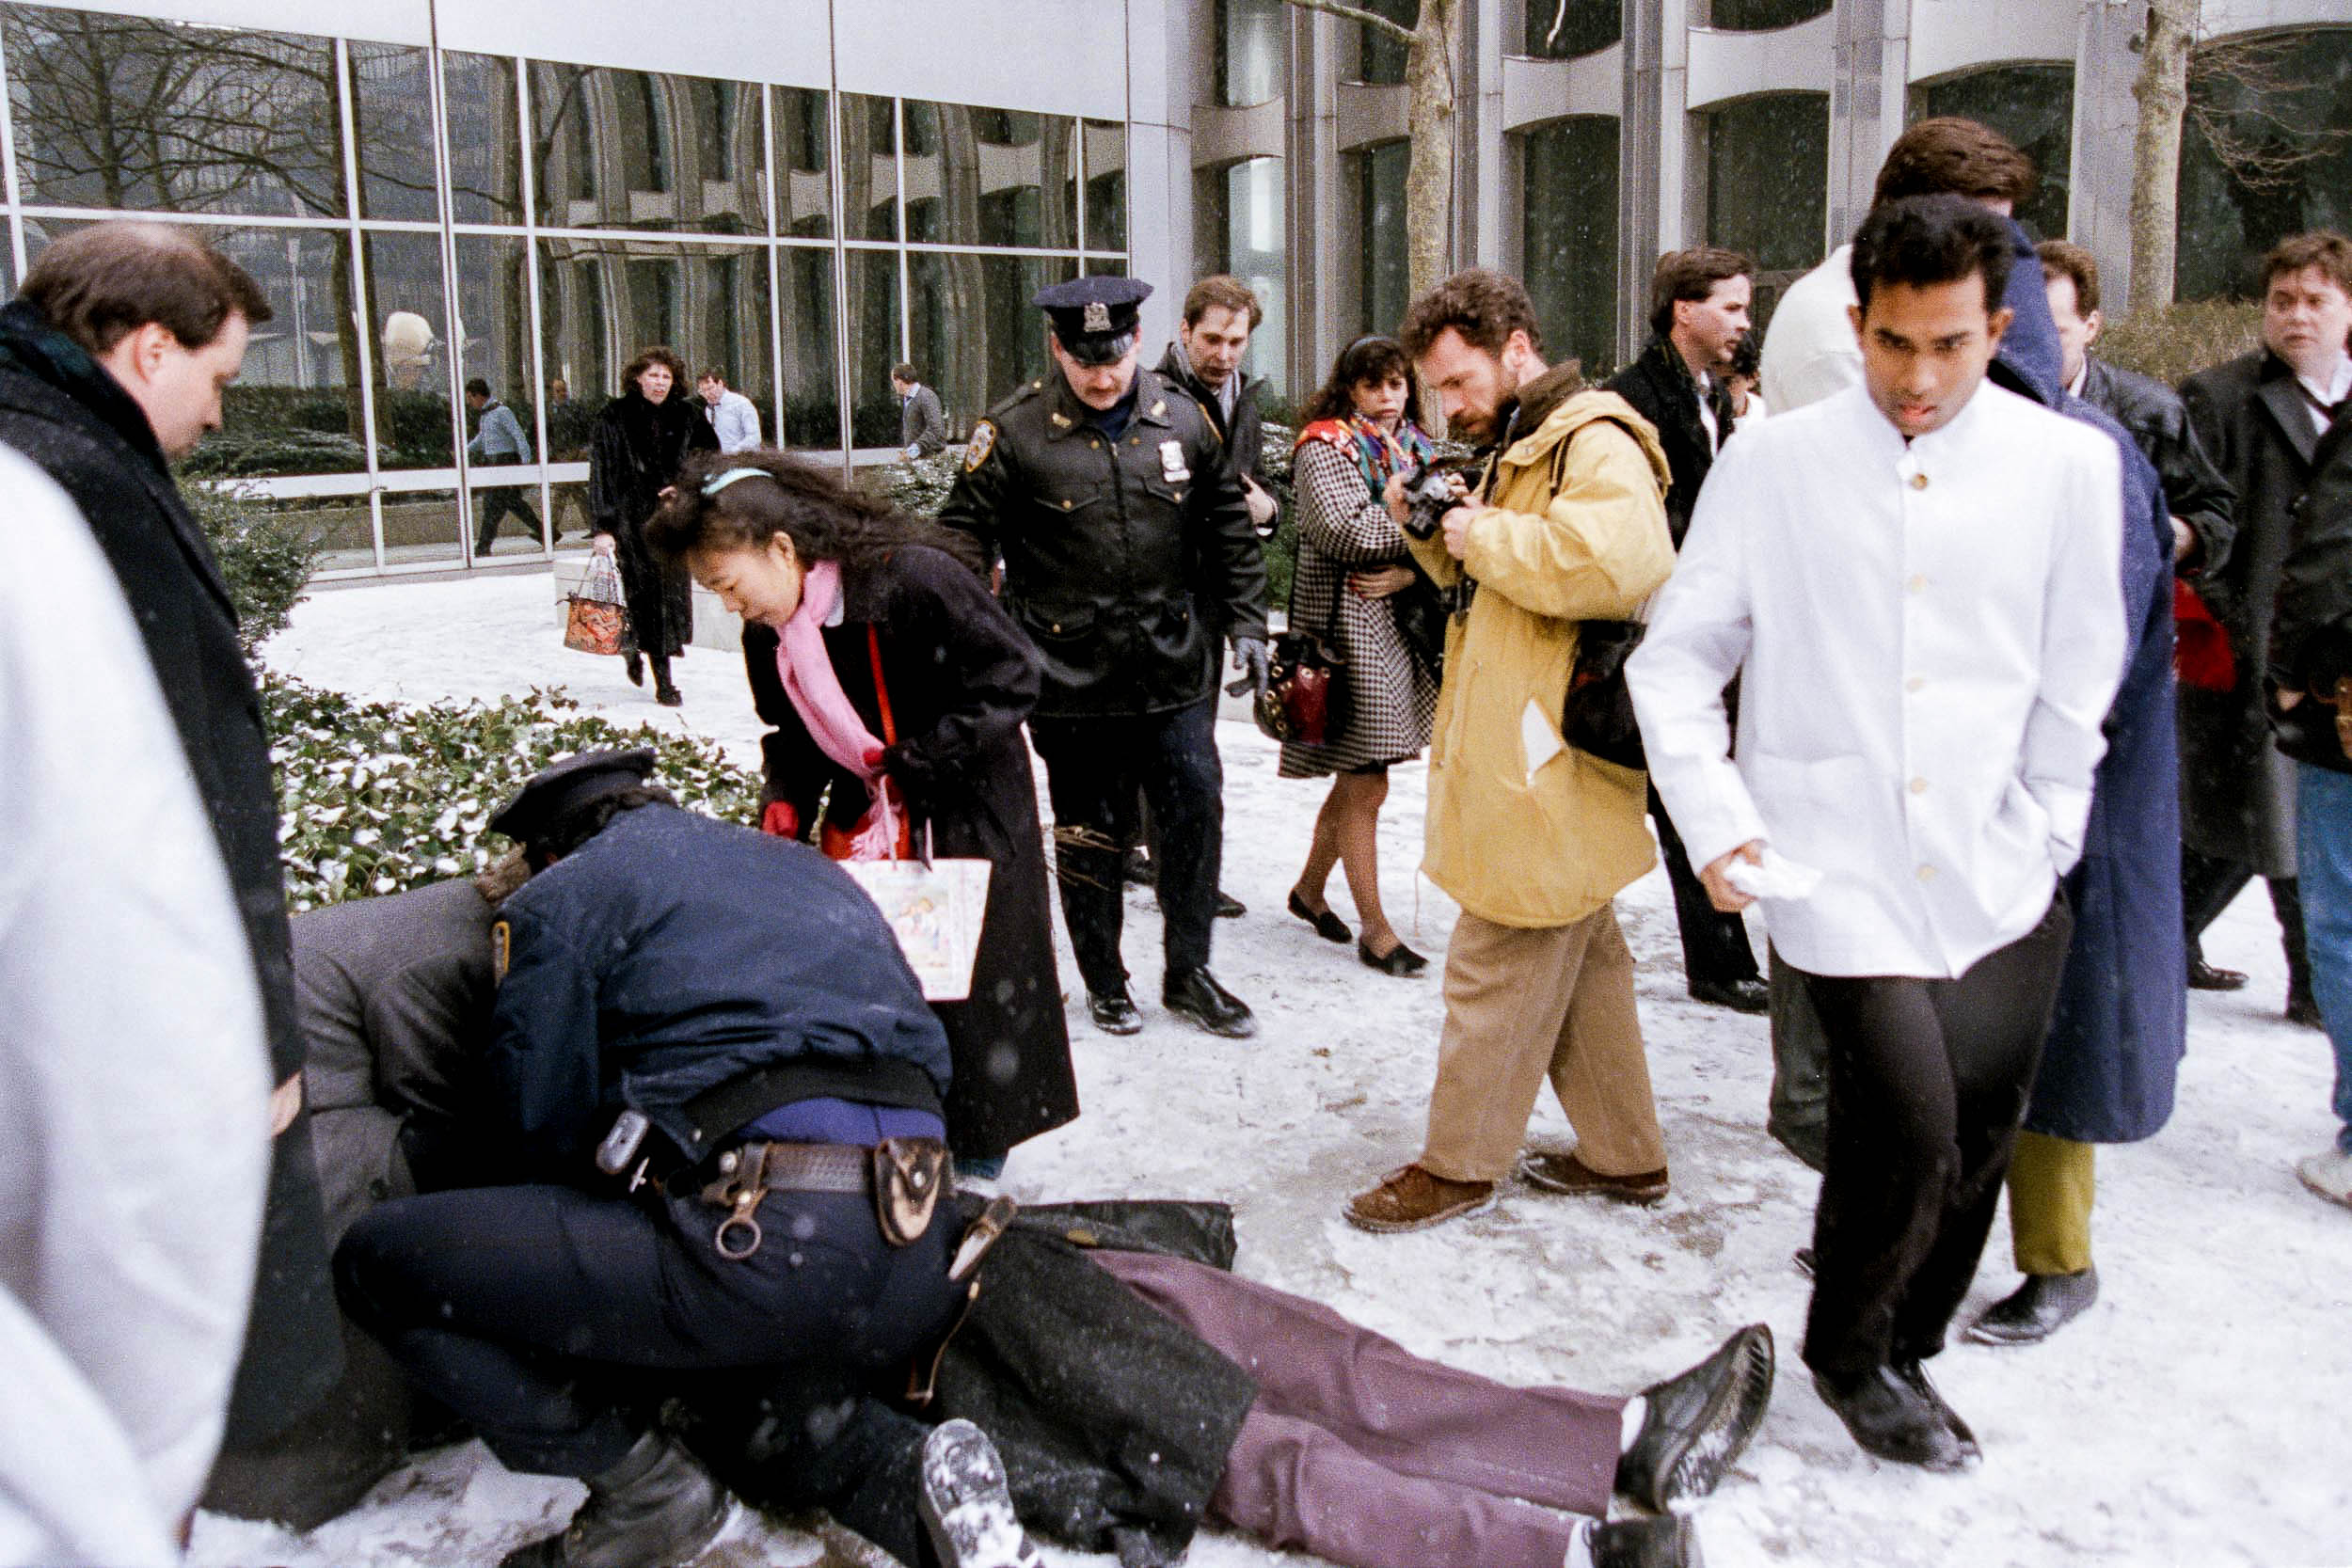 A policeman attends to a fallen office worker who slipped on the ice outside the World Trade Center, NY, 1993